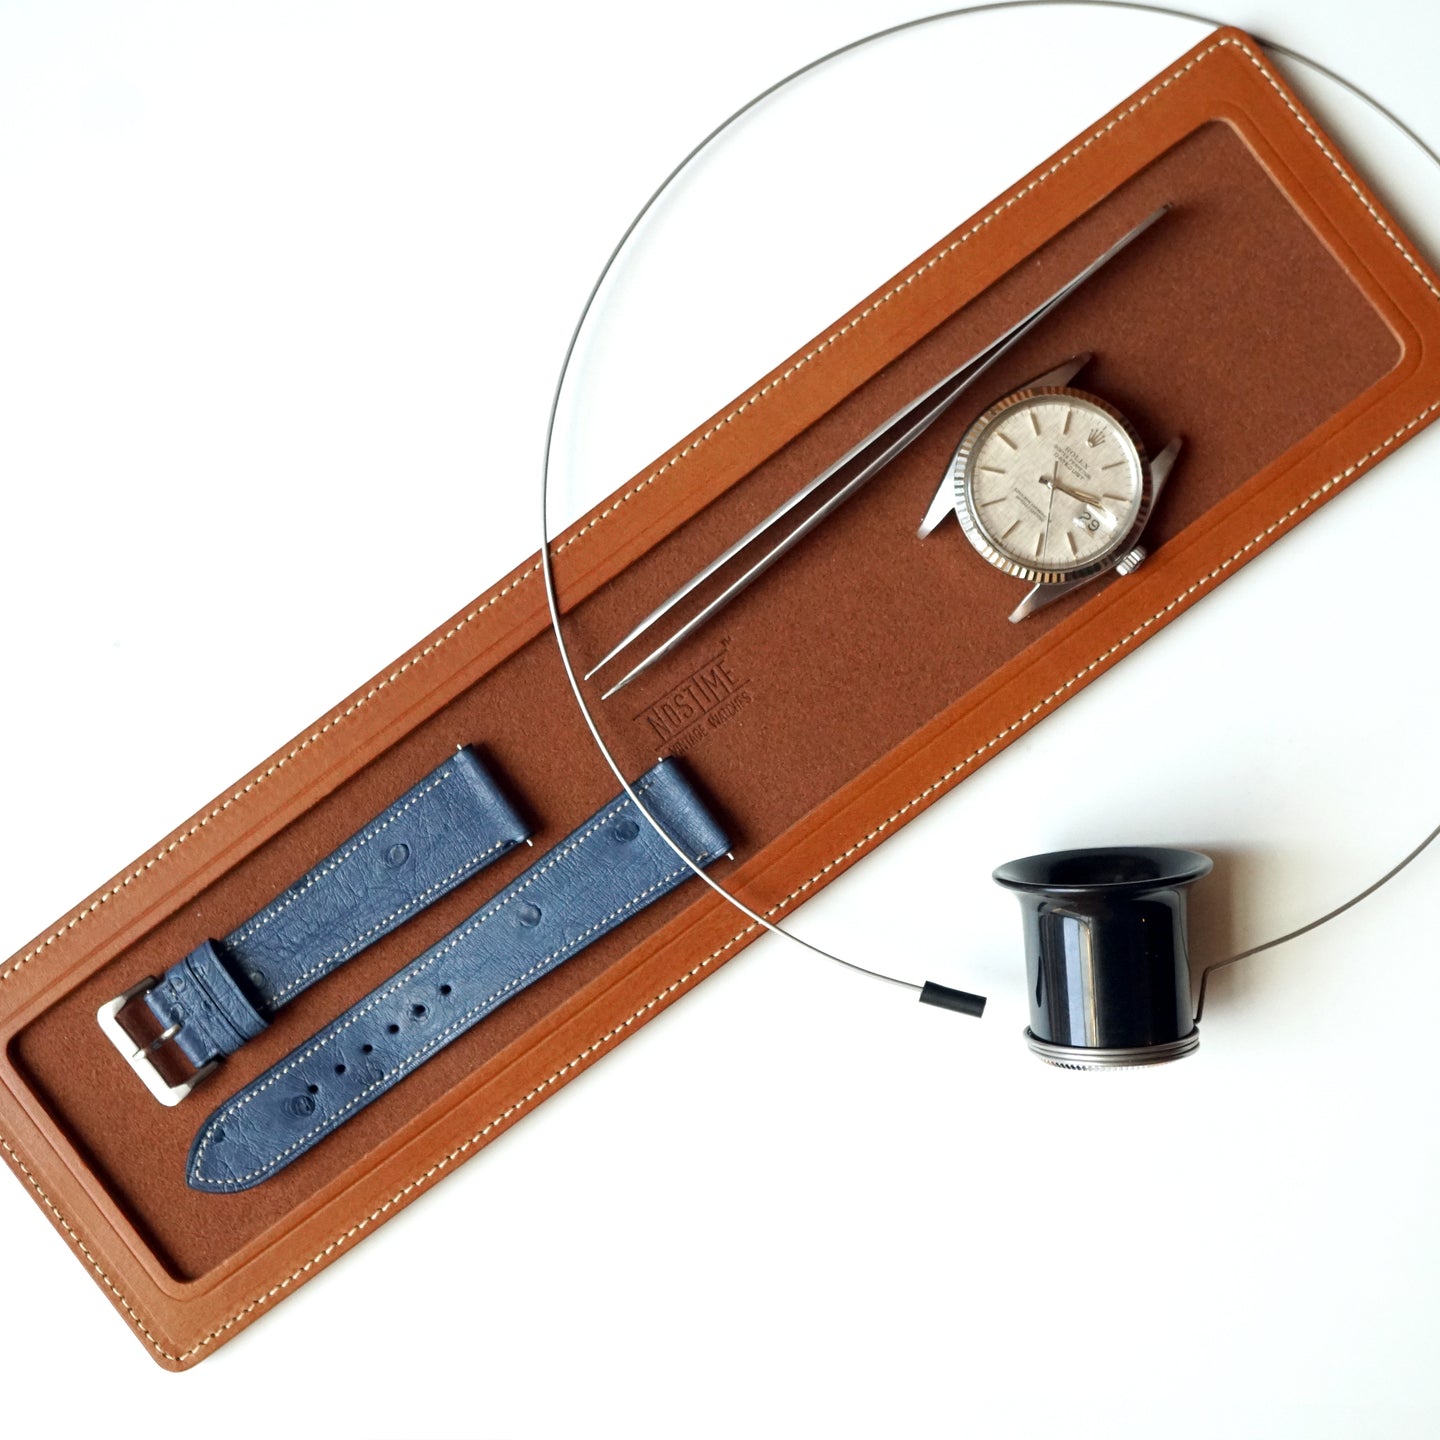 GOLD TAN LEATHER SINGLE WATCH TRAY